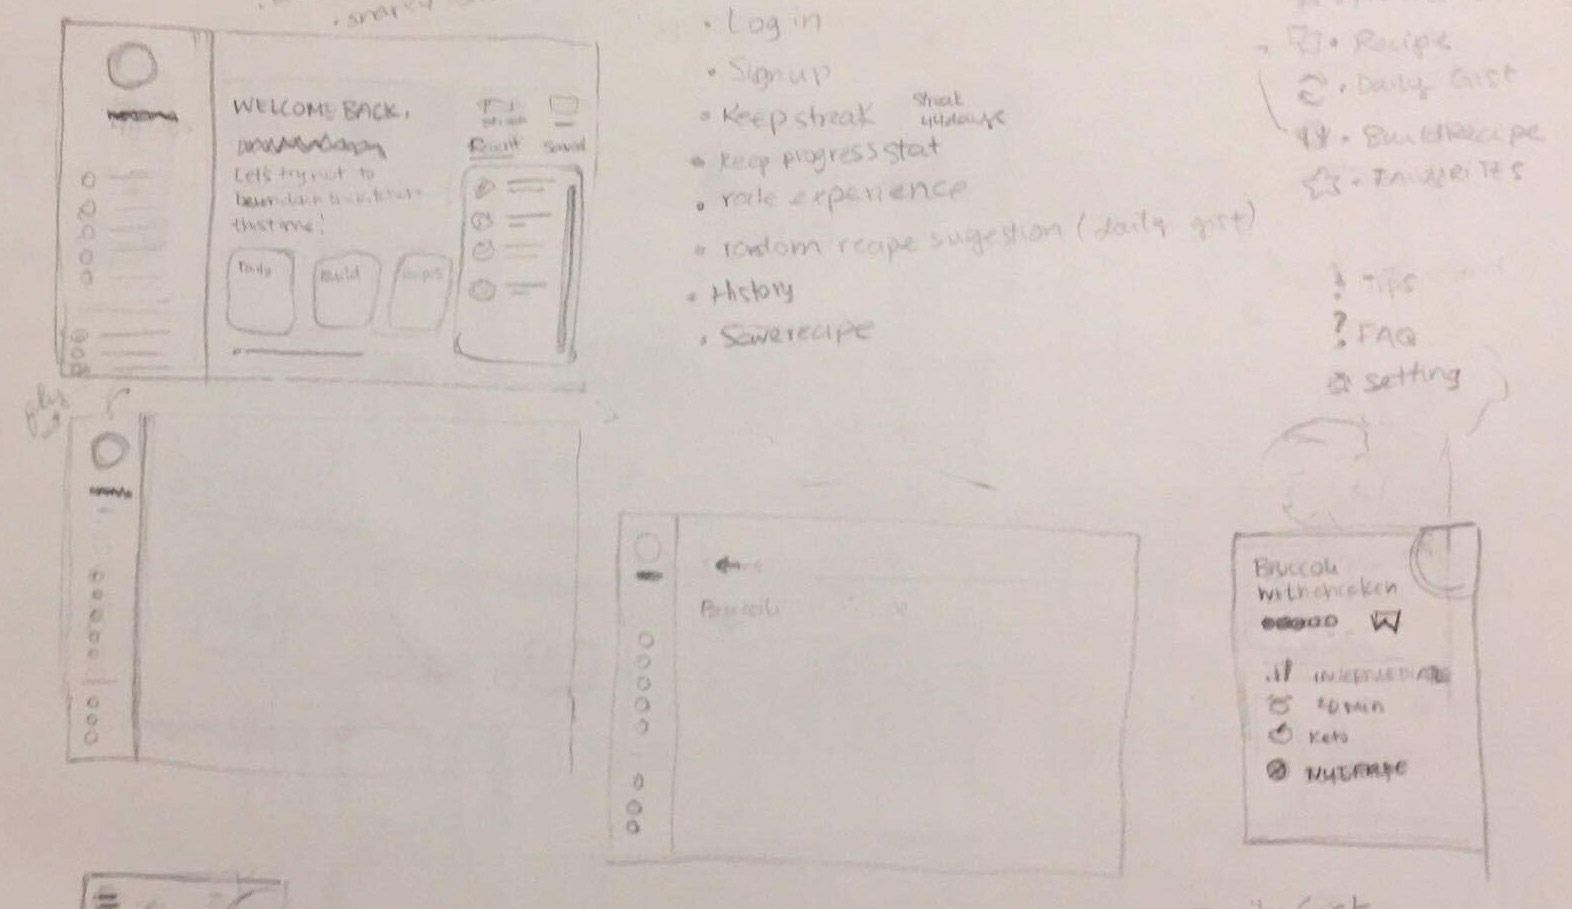 Rough sketch of what the home screen of the app would look like